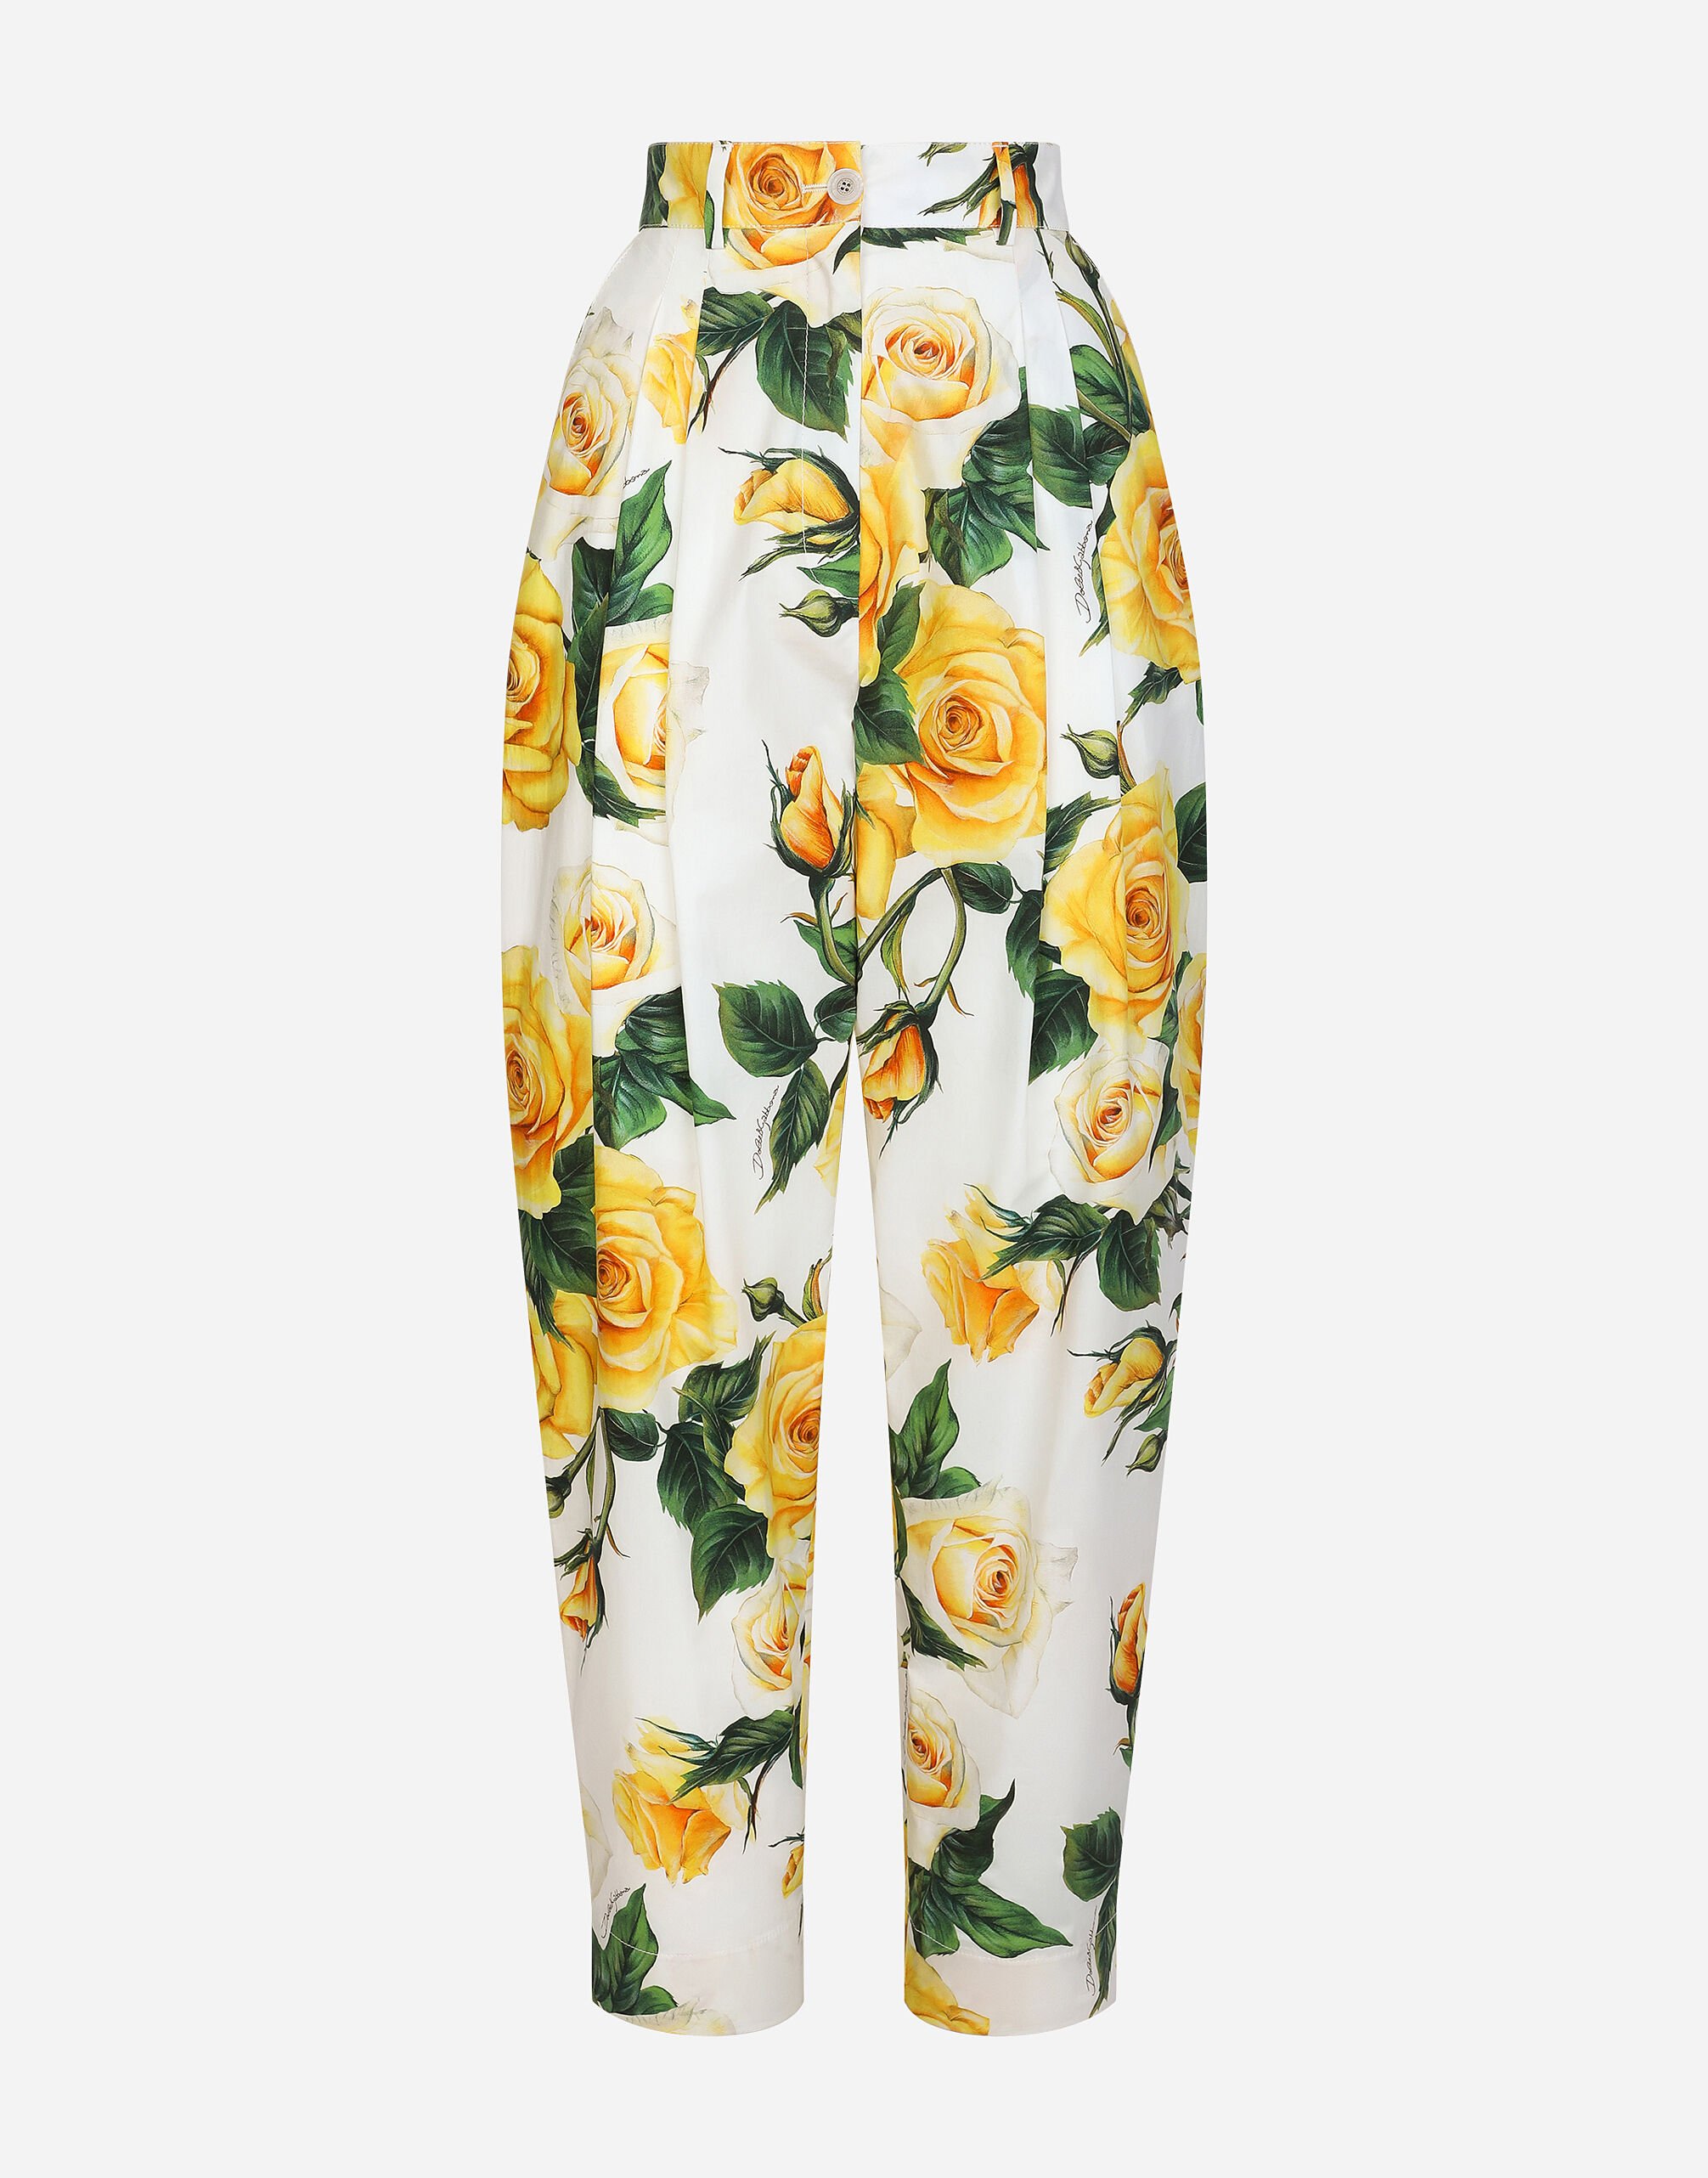 Dolce & Gabbana High-waisted cotton pants with yellow rose print Green BB7158AW437